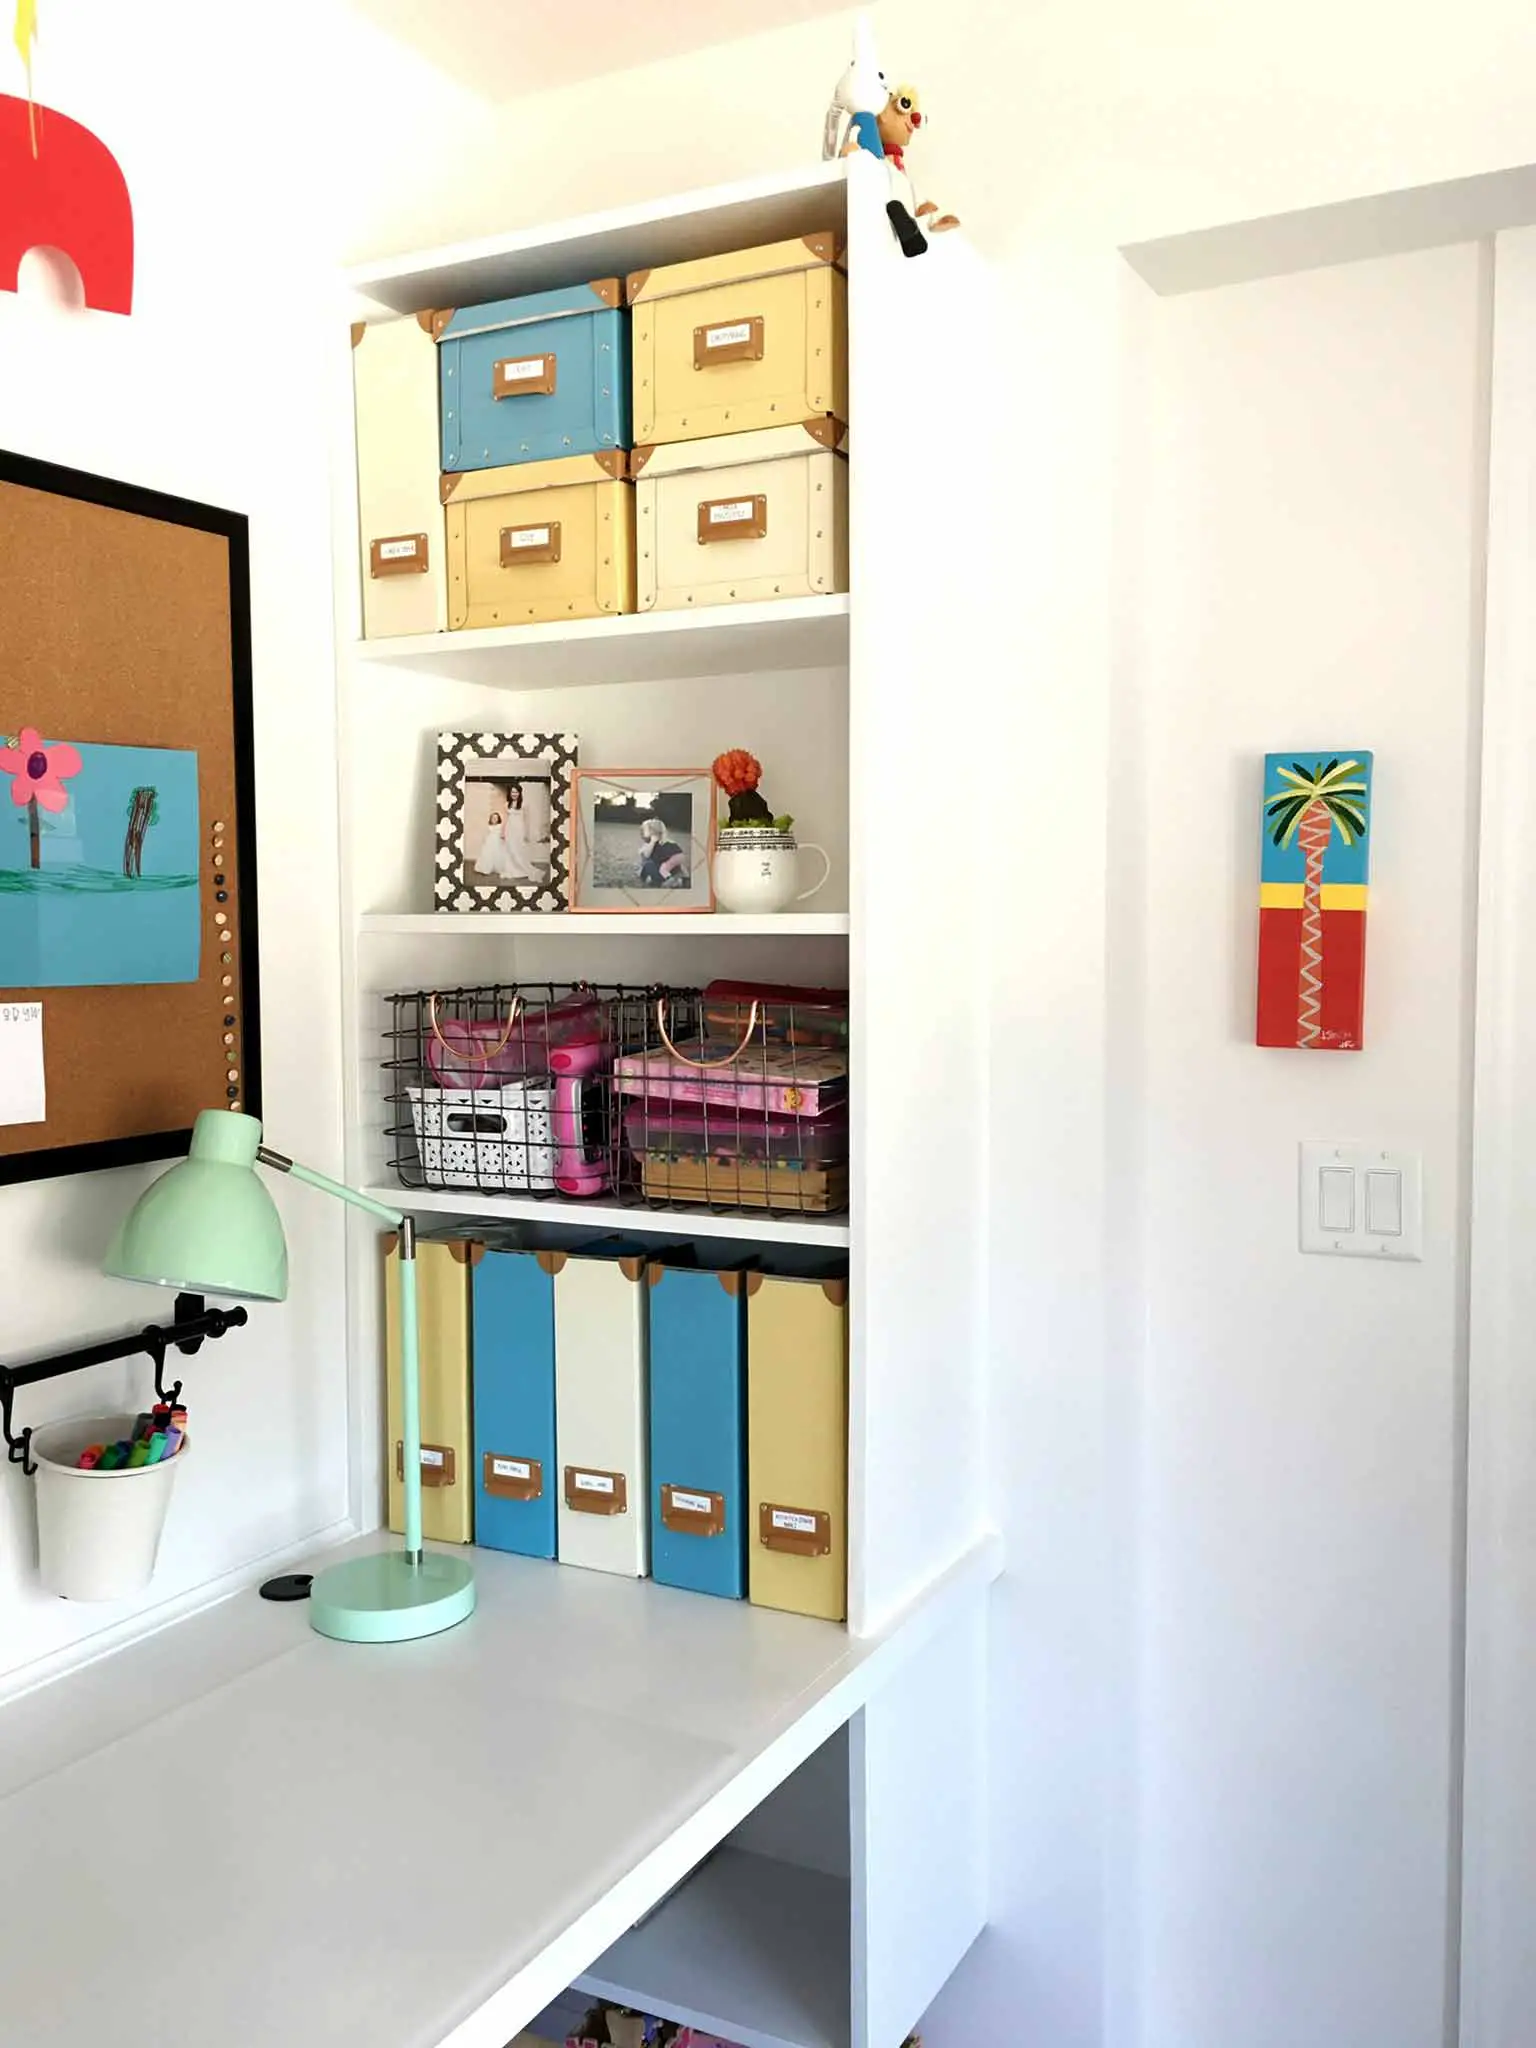 Kids art and craft station, built-in desk, closet and shelving - playroom house tour - That Homebird Life Blog